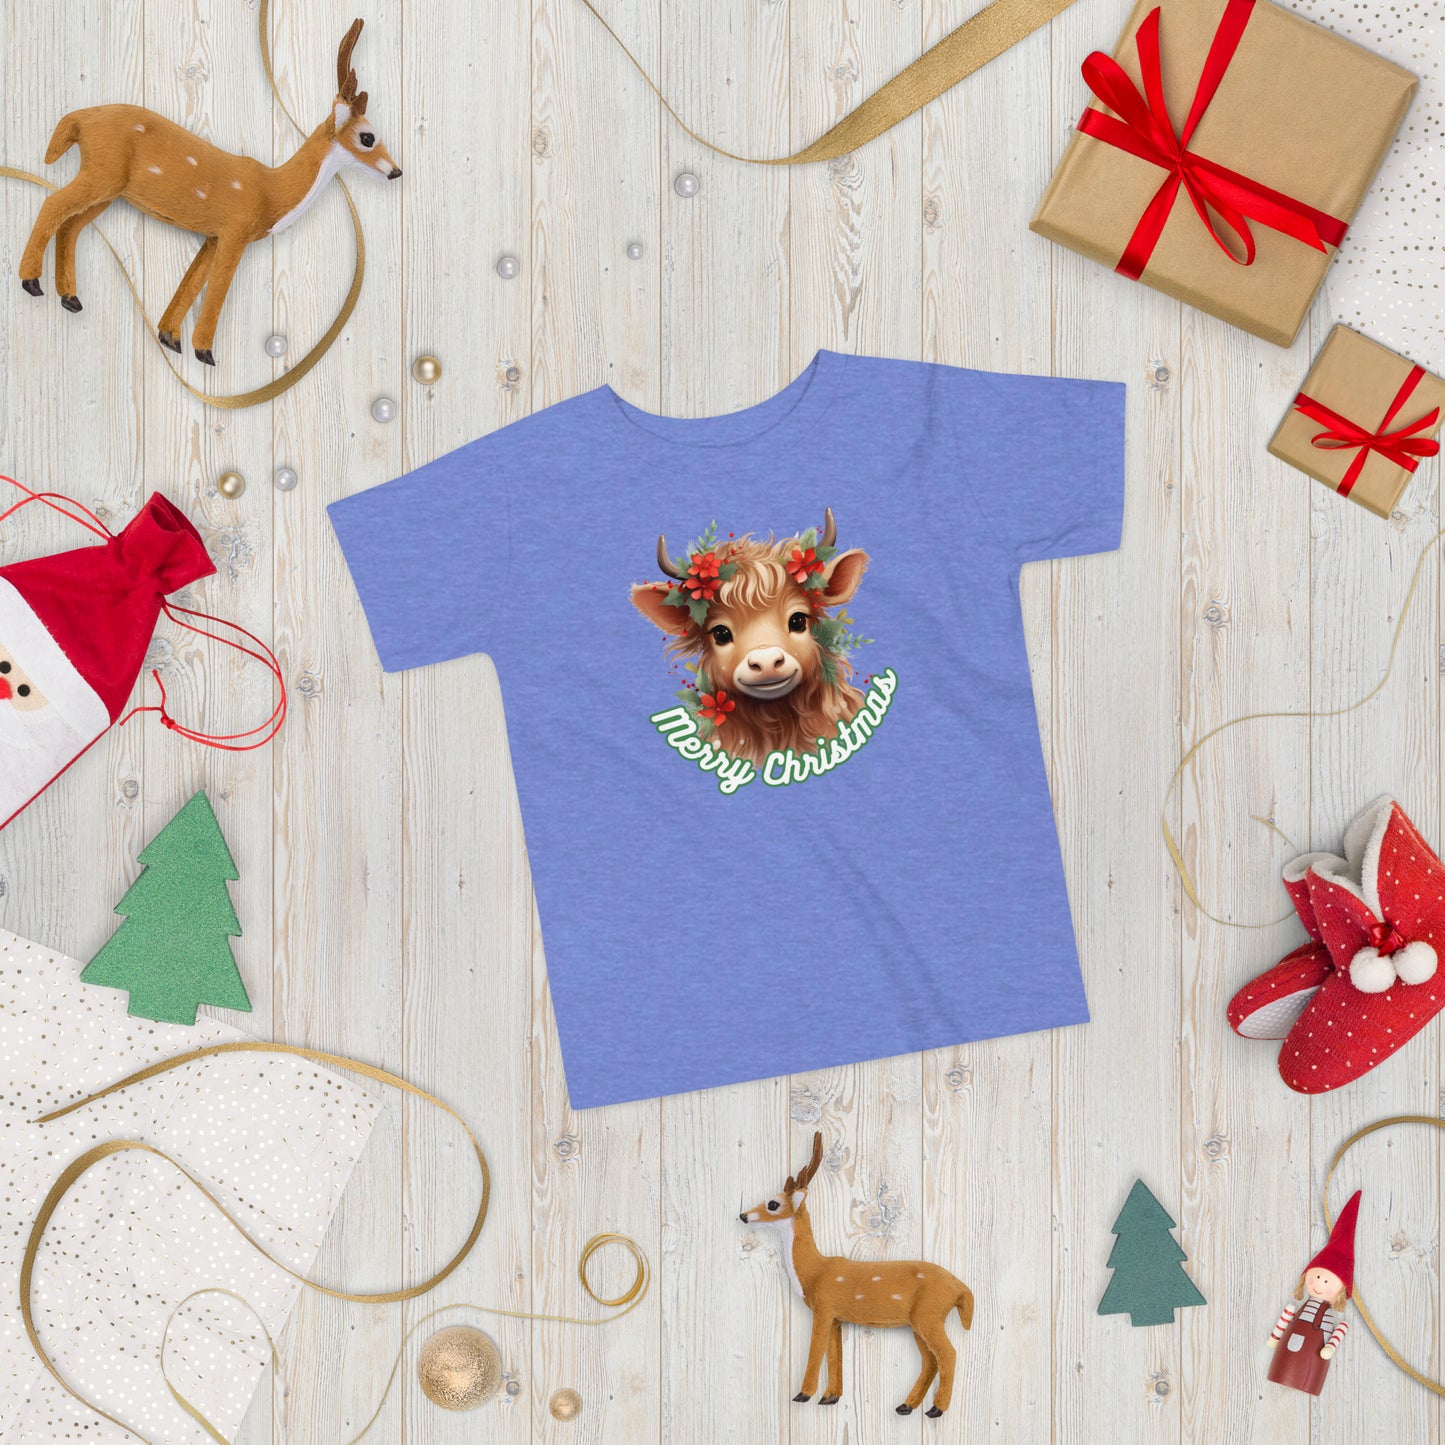 Christmas Highland Cow T-Shirt - High Quality Festive Family Children T-Shirt, Gift for Cow Lovers, Cute Christmas Shirt, Toddler Xmas Tee